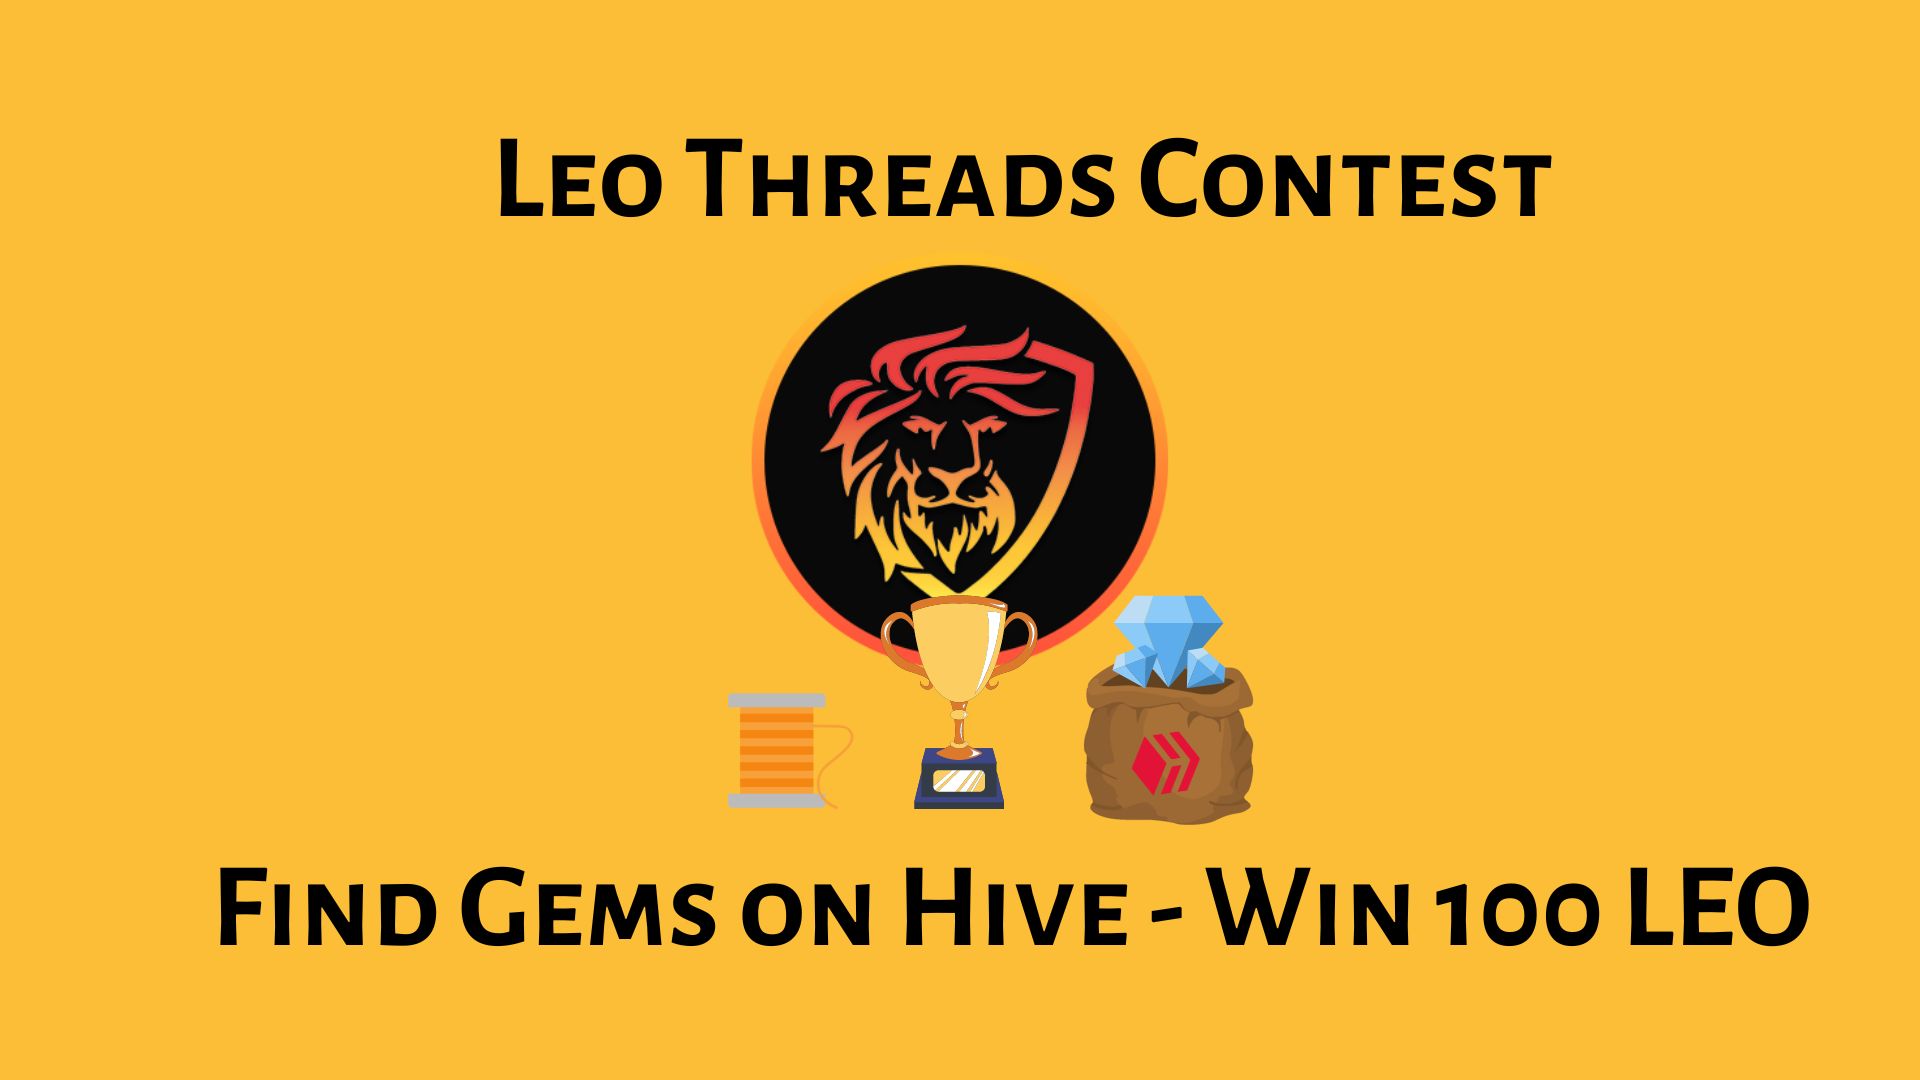 @jerrythefarmer/weekend-leo-threads-contest-share-your-hive-gems-and-win-a-share-of-100-leo